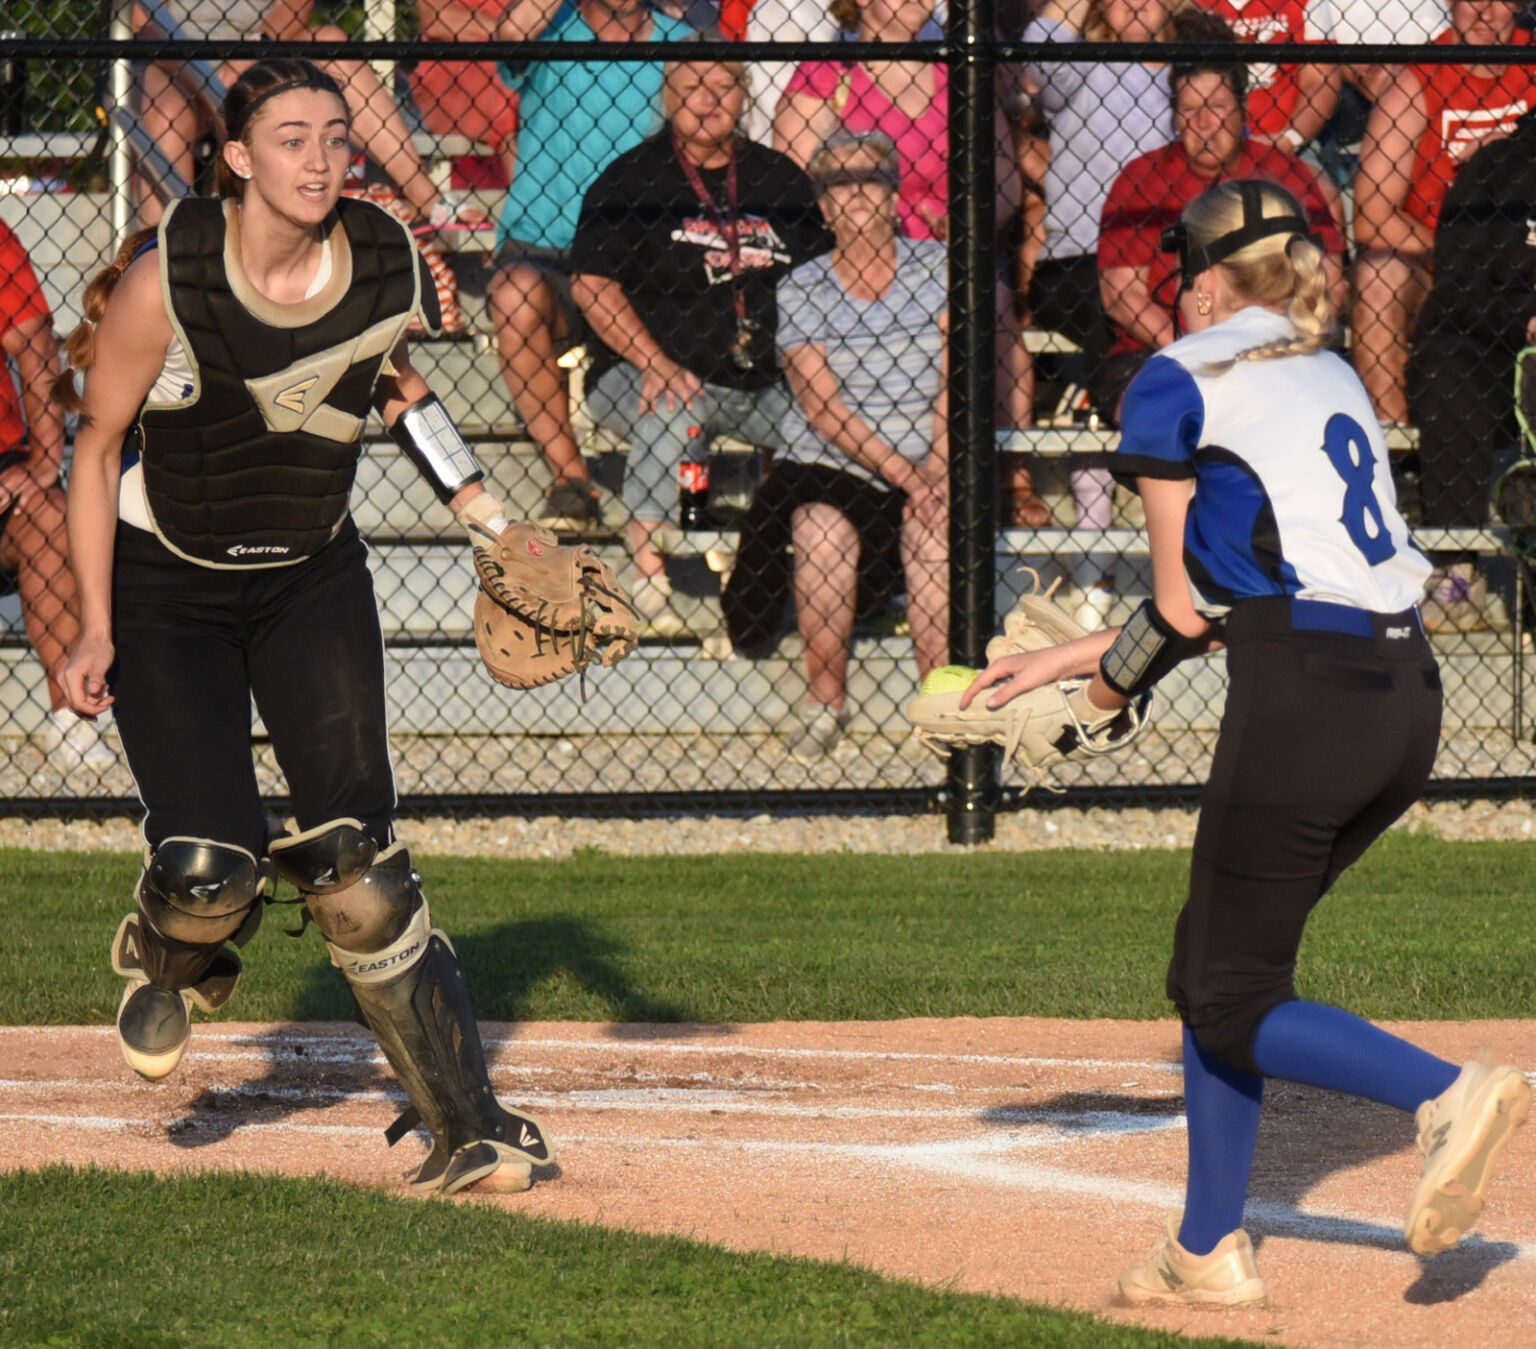 Connersville beats Greensburg 9-4 in thrilling sectional clash; Franklin County cruises 11-1 over Batesville